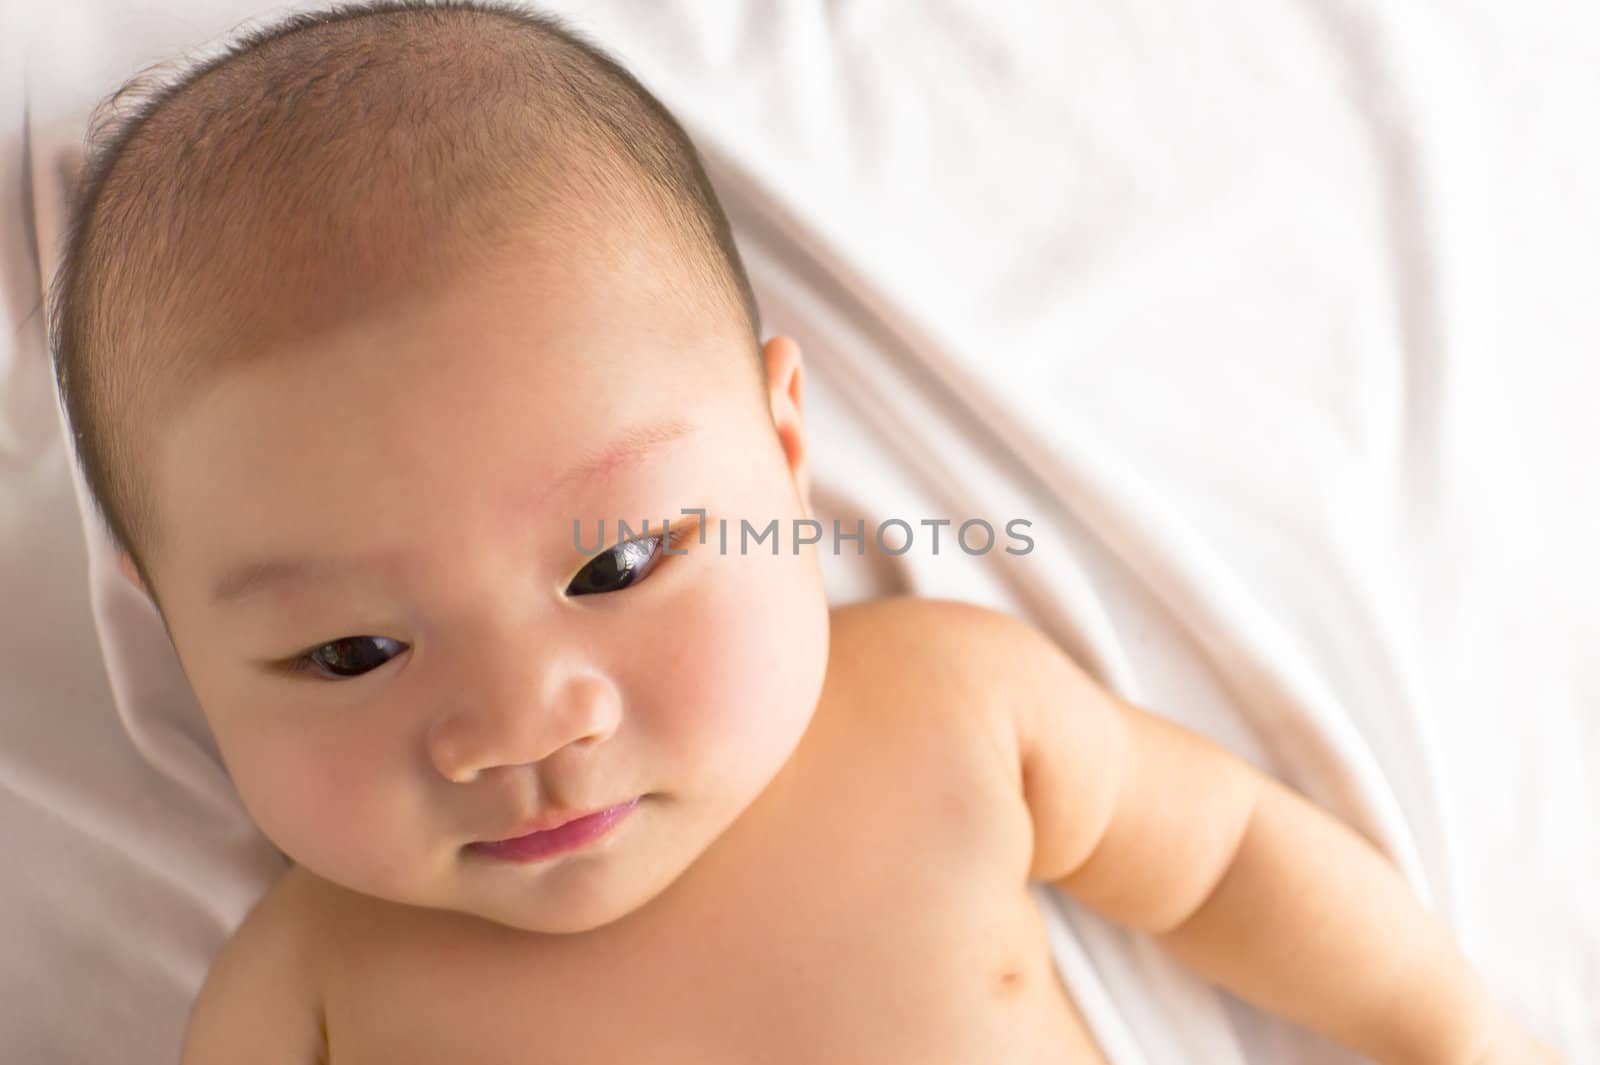 A cute asian baby resting on the bed looking down